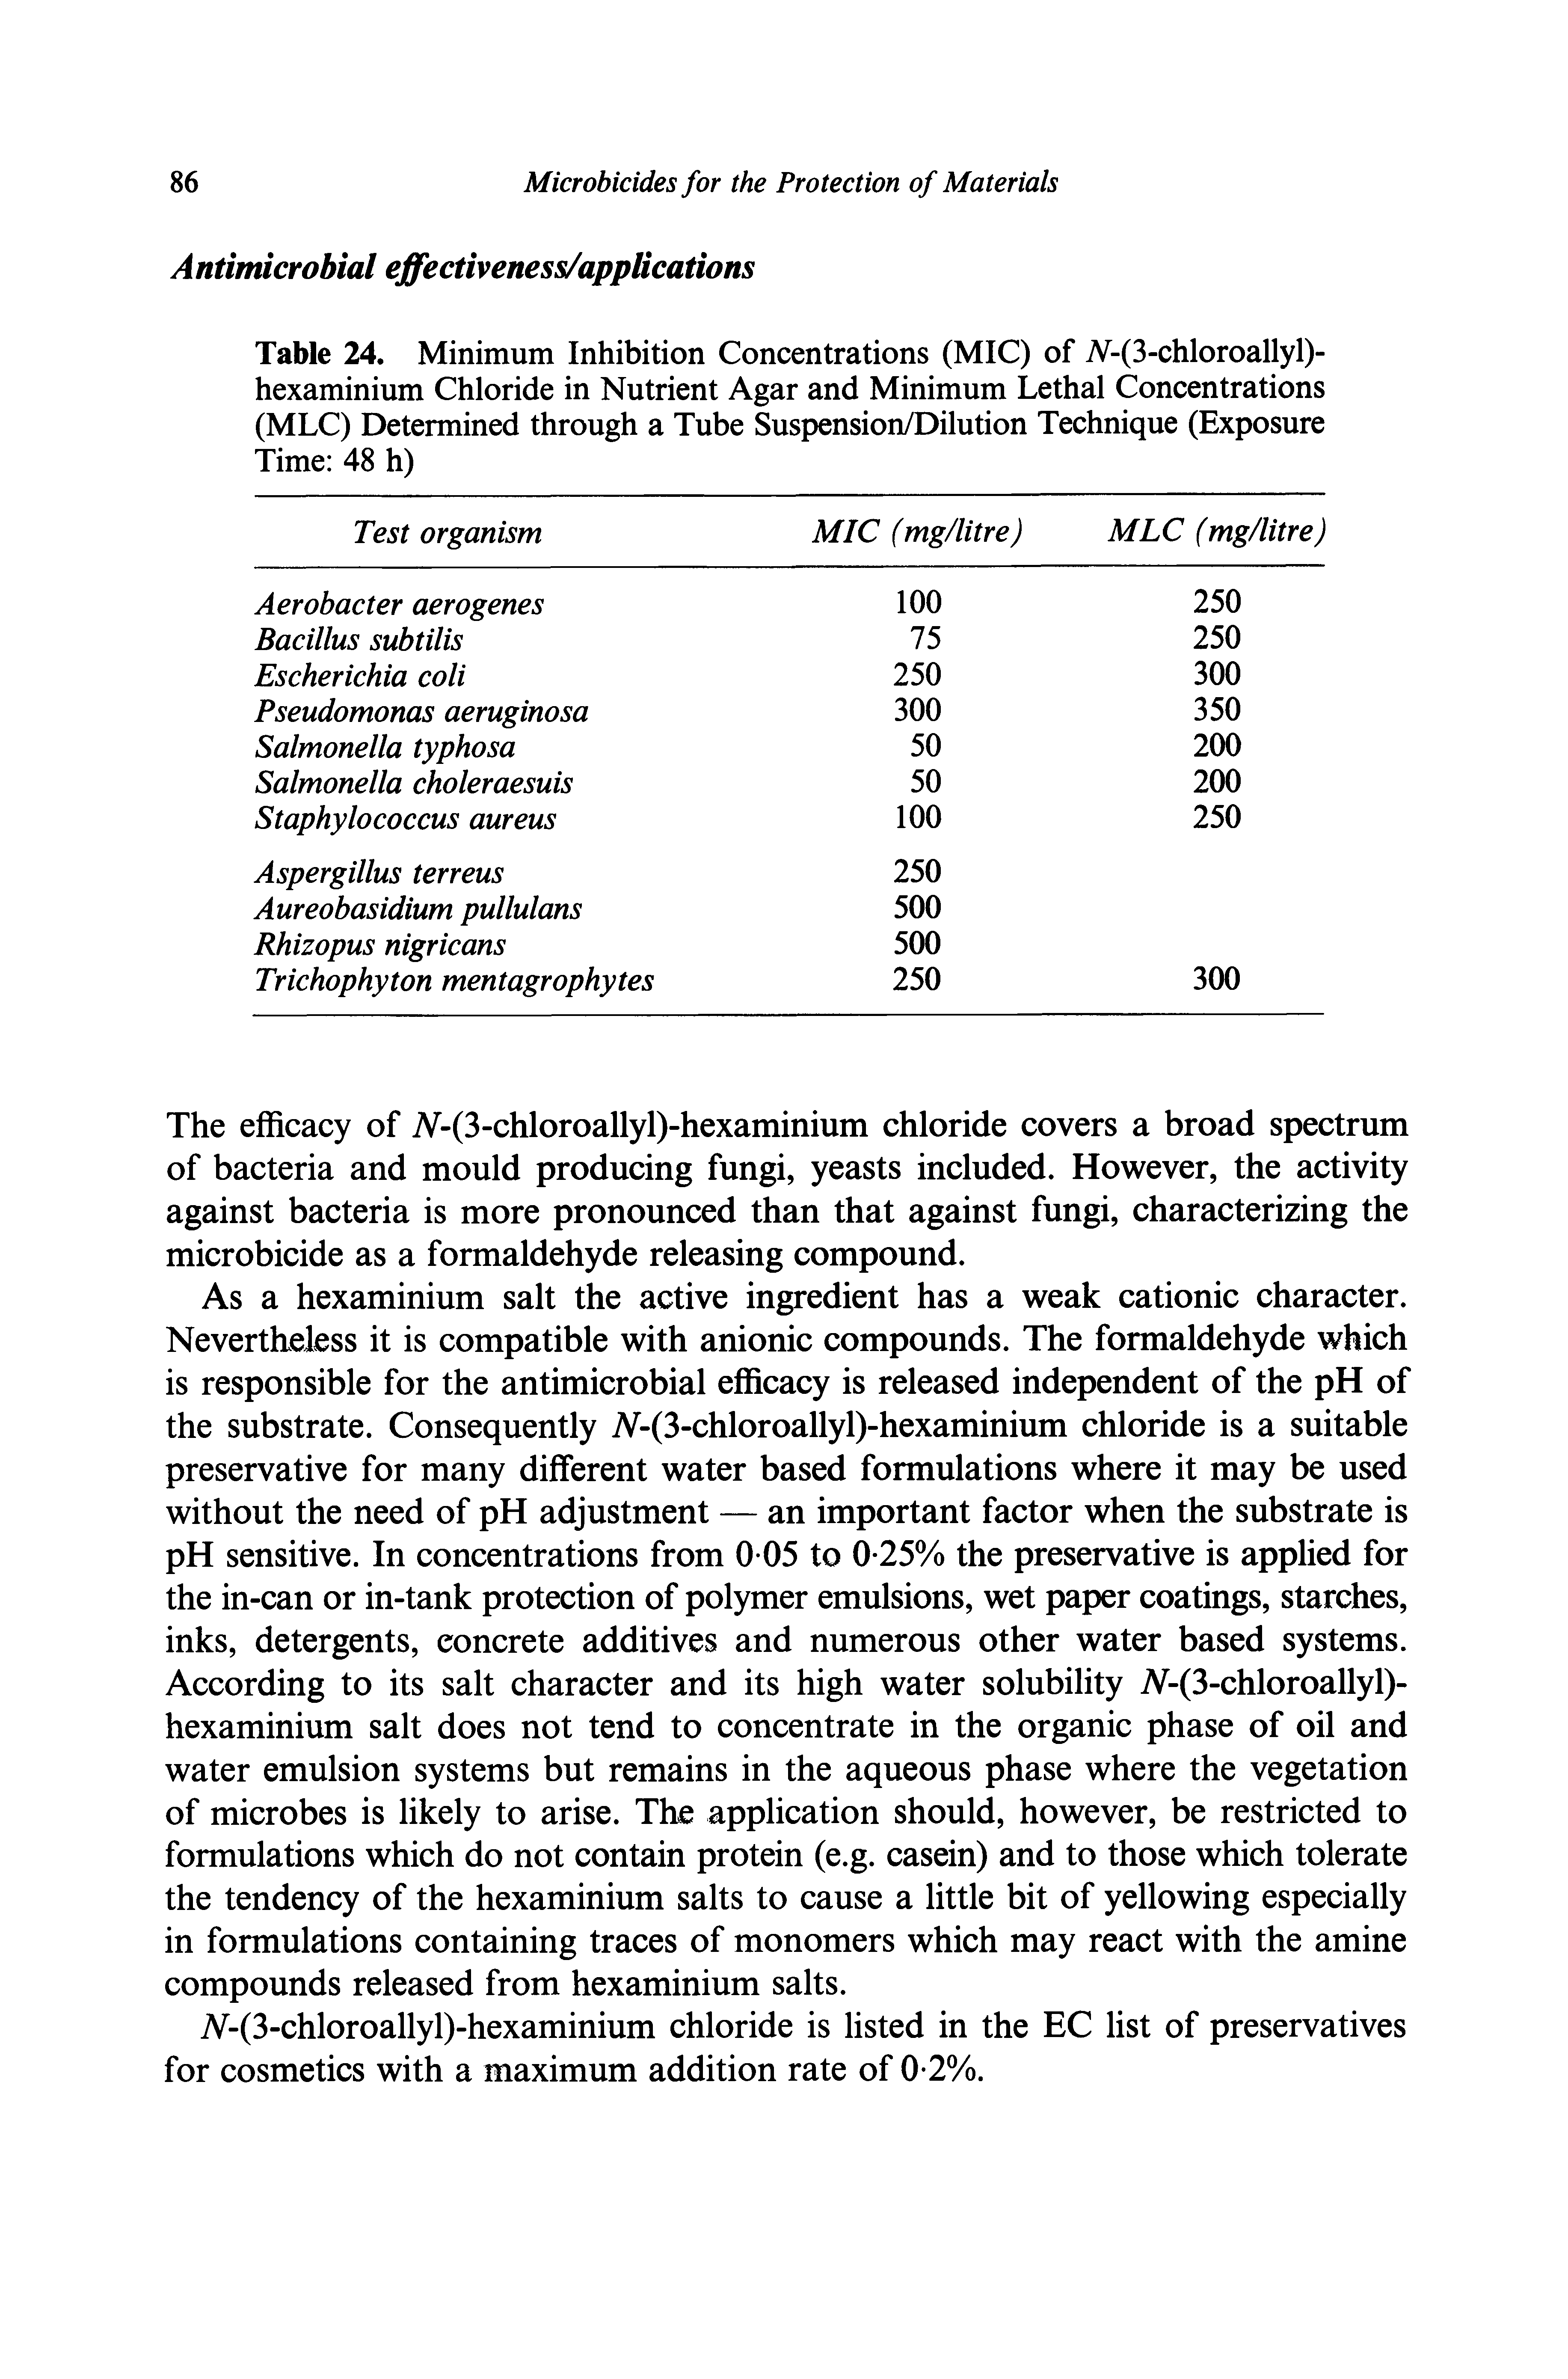 Table 24. Minimum Inhibition Concentrations (MIC) of iV-(3-chloroallyl)-hexaminium Chloride in Nutrient Agar and Minimum Lethal Concentrations (MLC) Determined through a Tube Suspension/Dilution Technique (Exposure Time 48 h)...